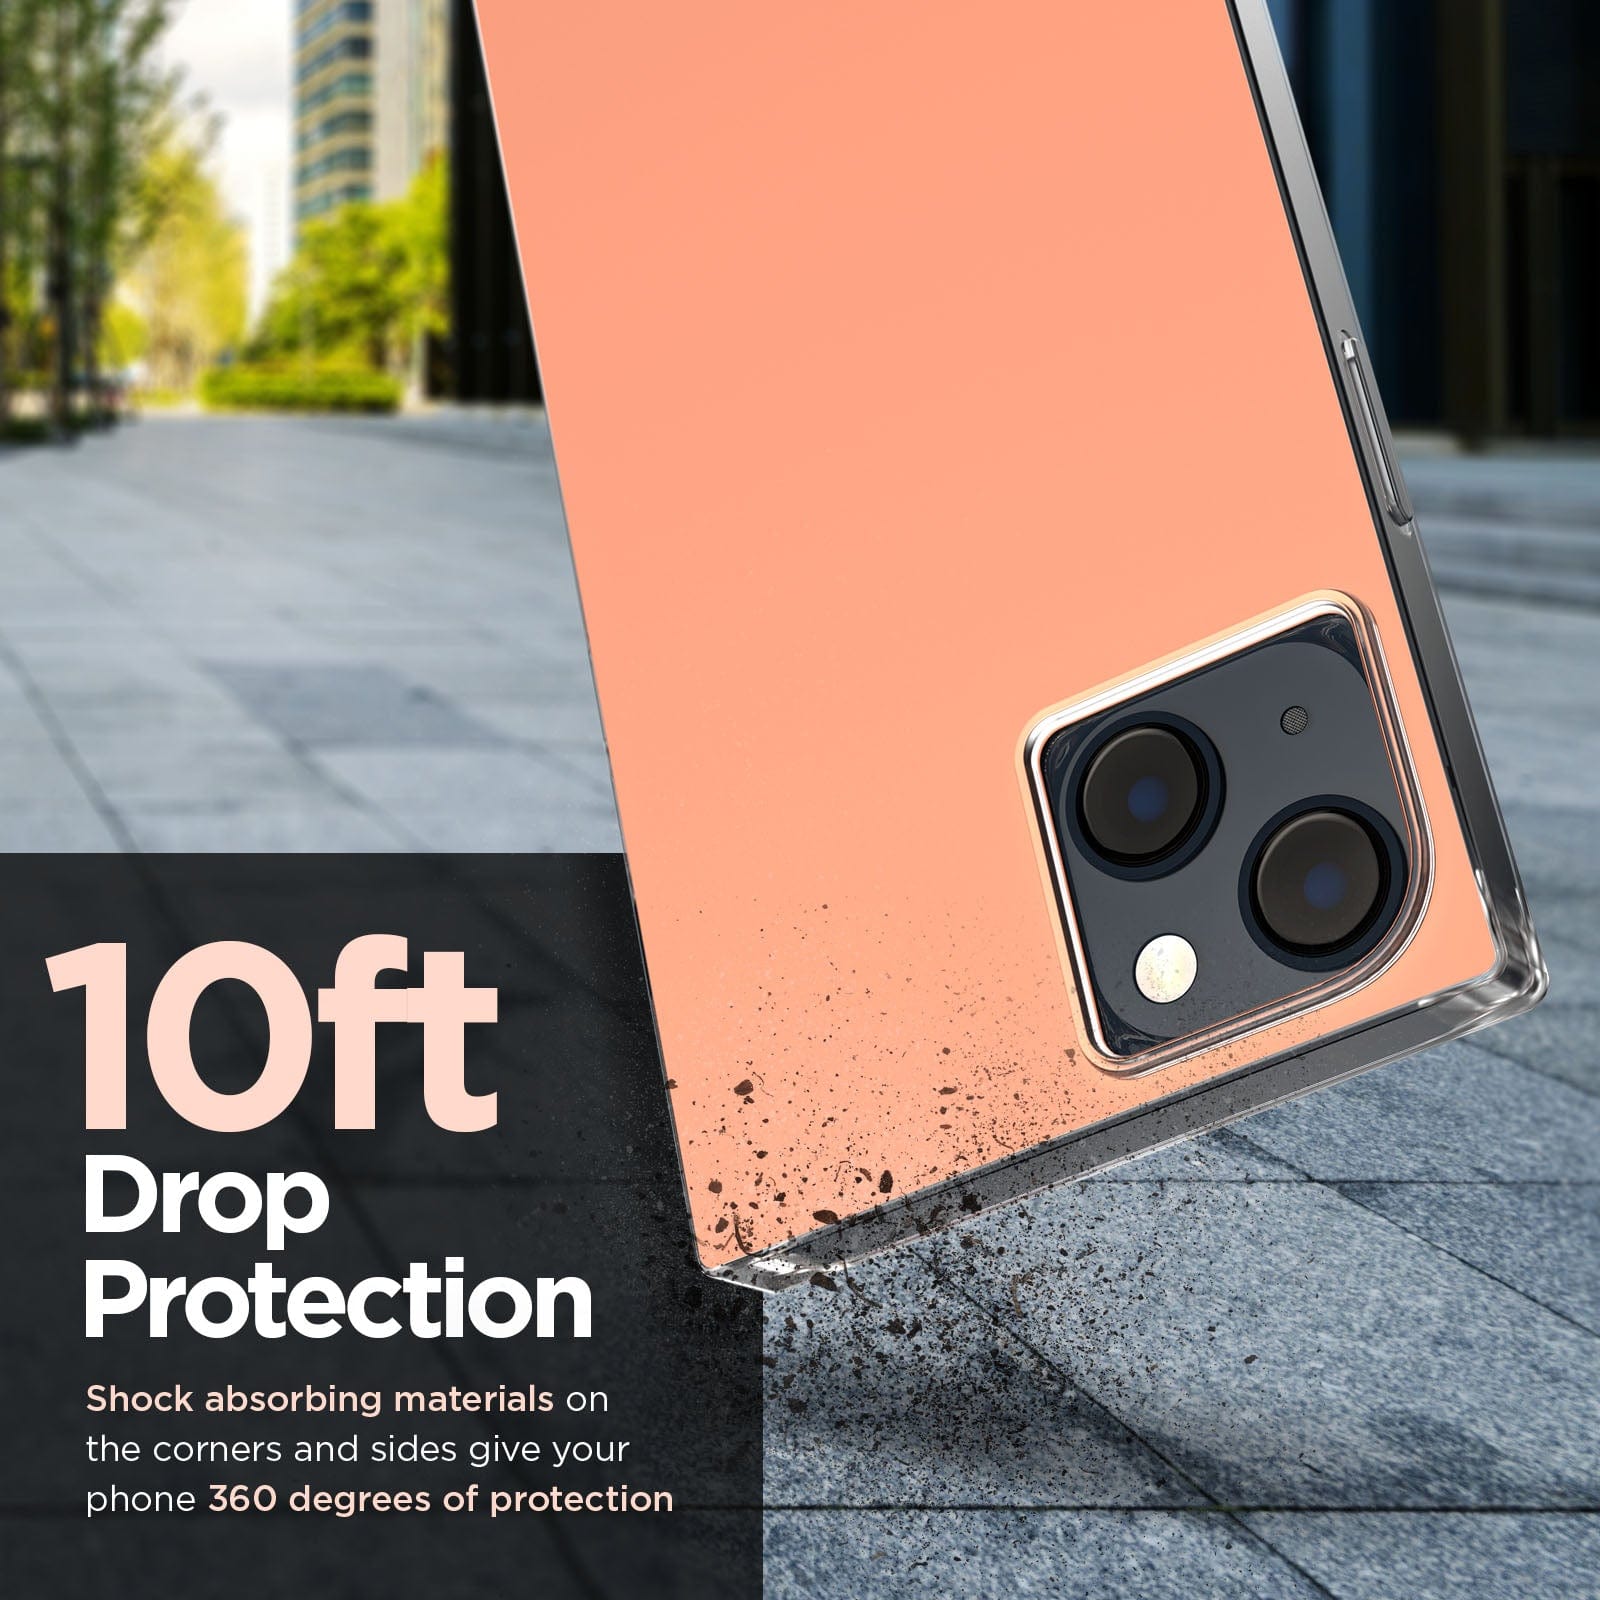 10ft Drop Protection. Shock absorbing materials on the corner and sides give your phone 360 degrees of protection. color::Clay Pink